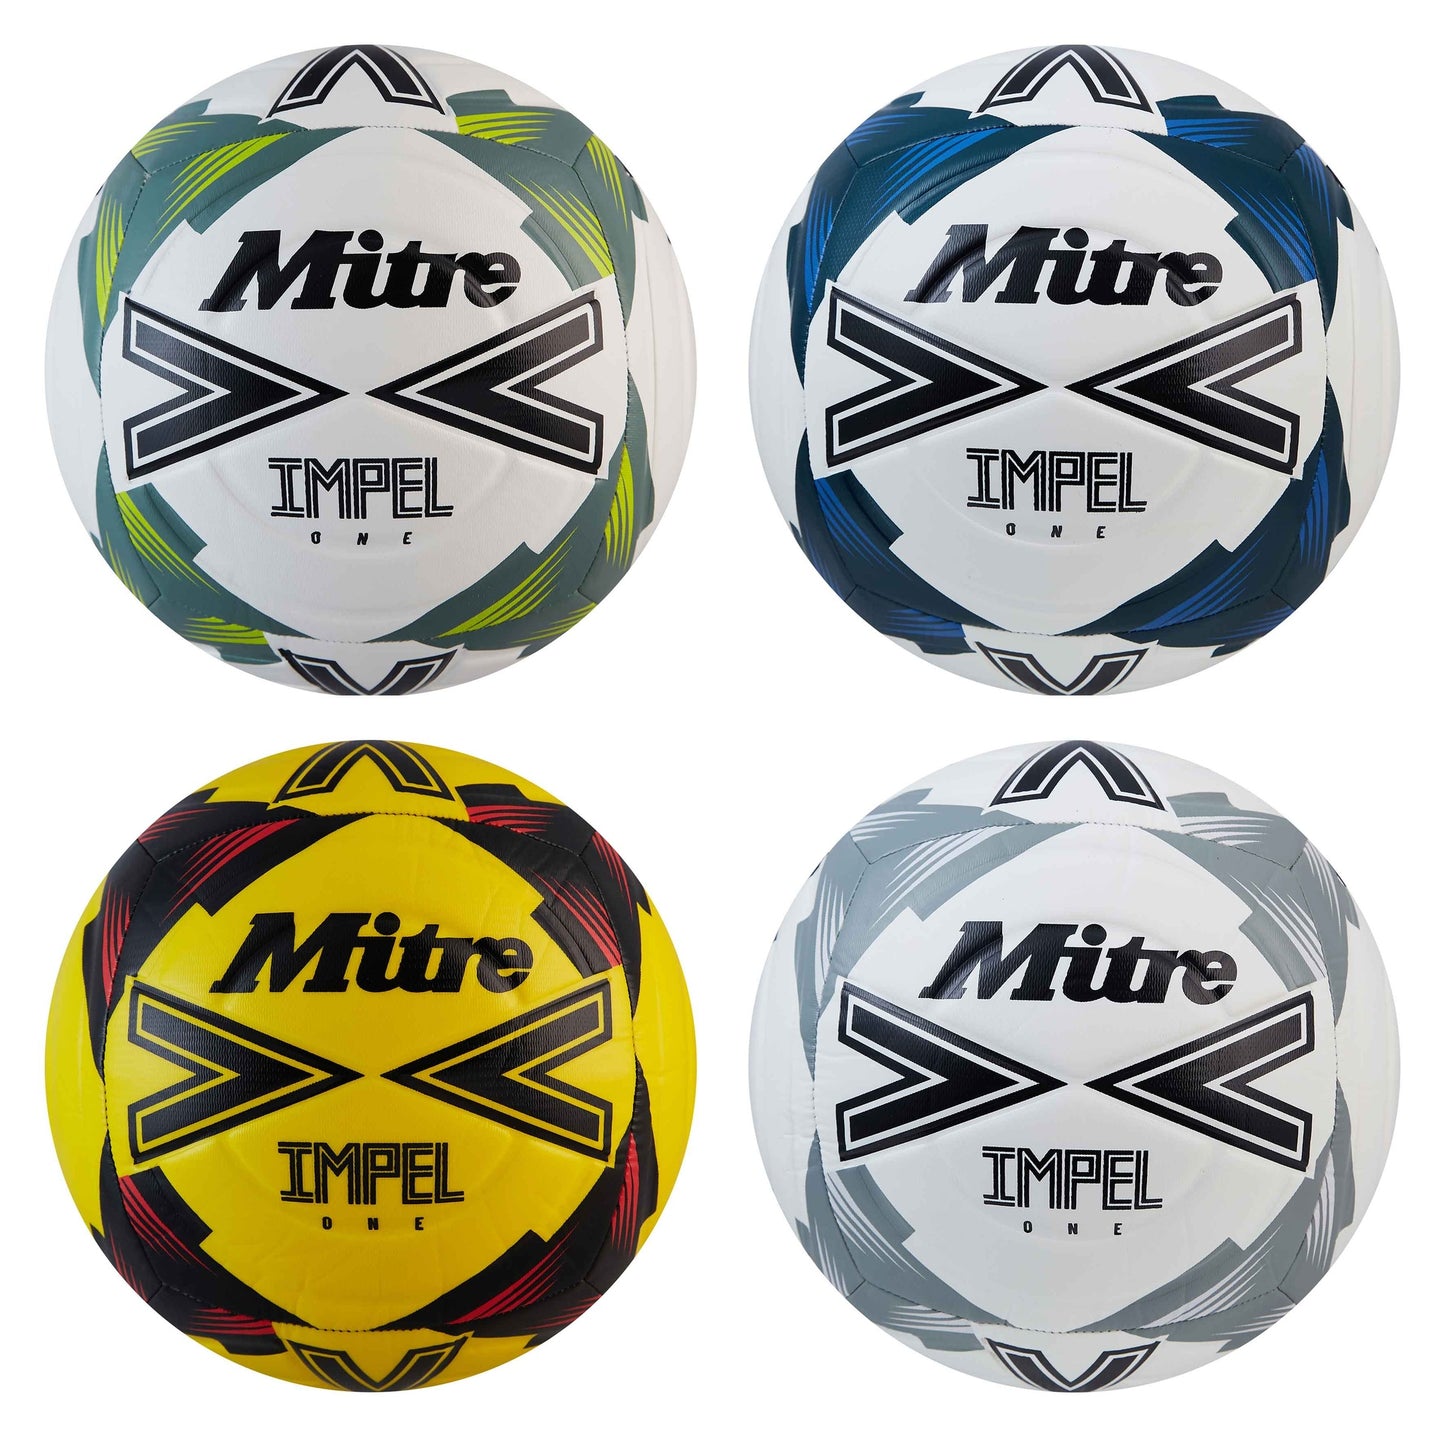 Mitre Impel One Football - 4 - Pink/White/Teal